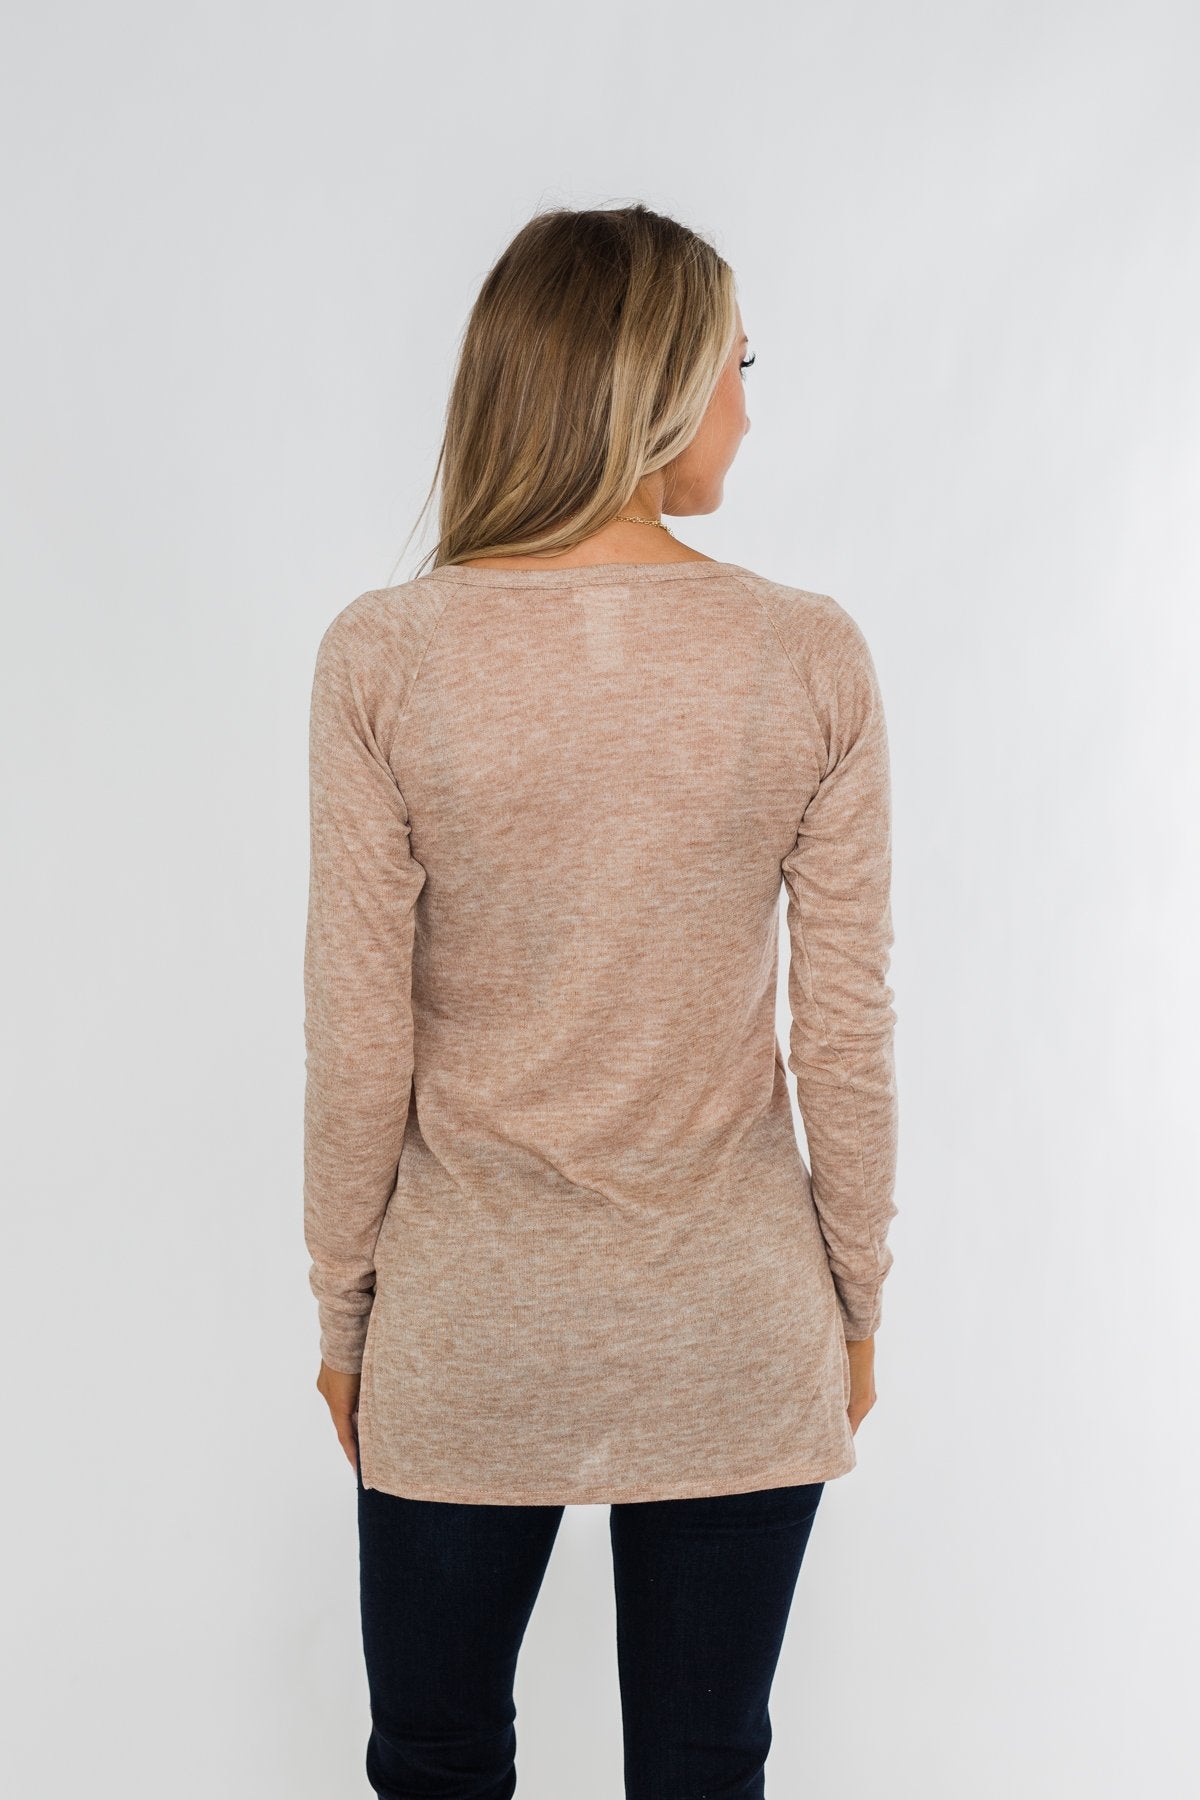 The Time Of My Life Button Henley Top- Oatmeal